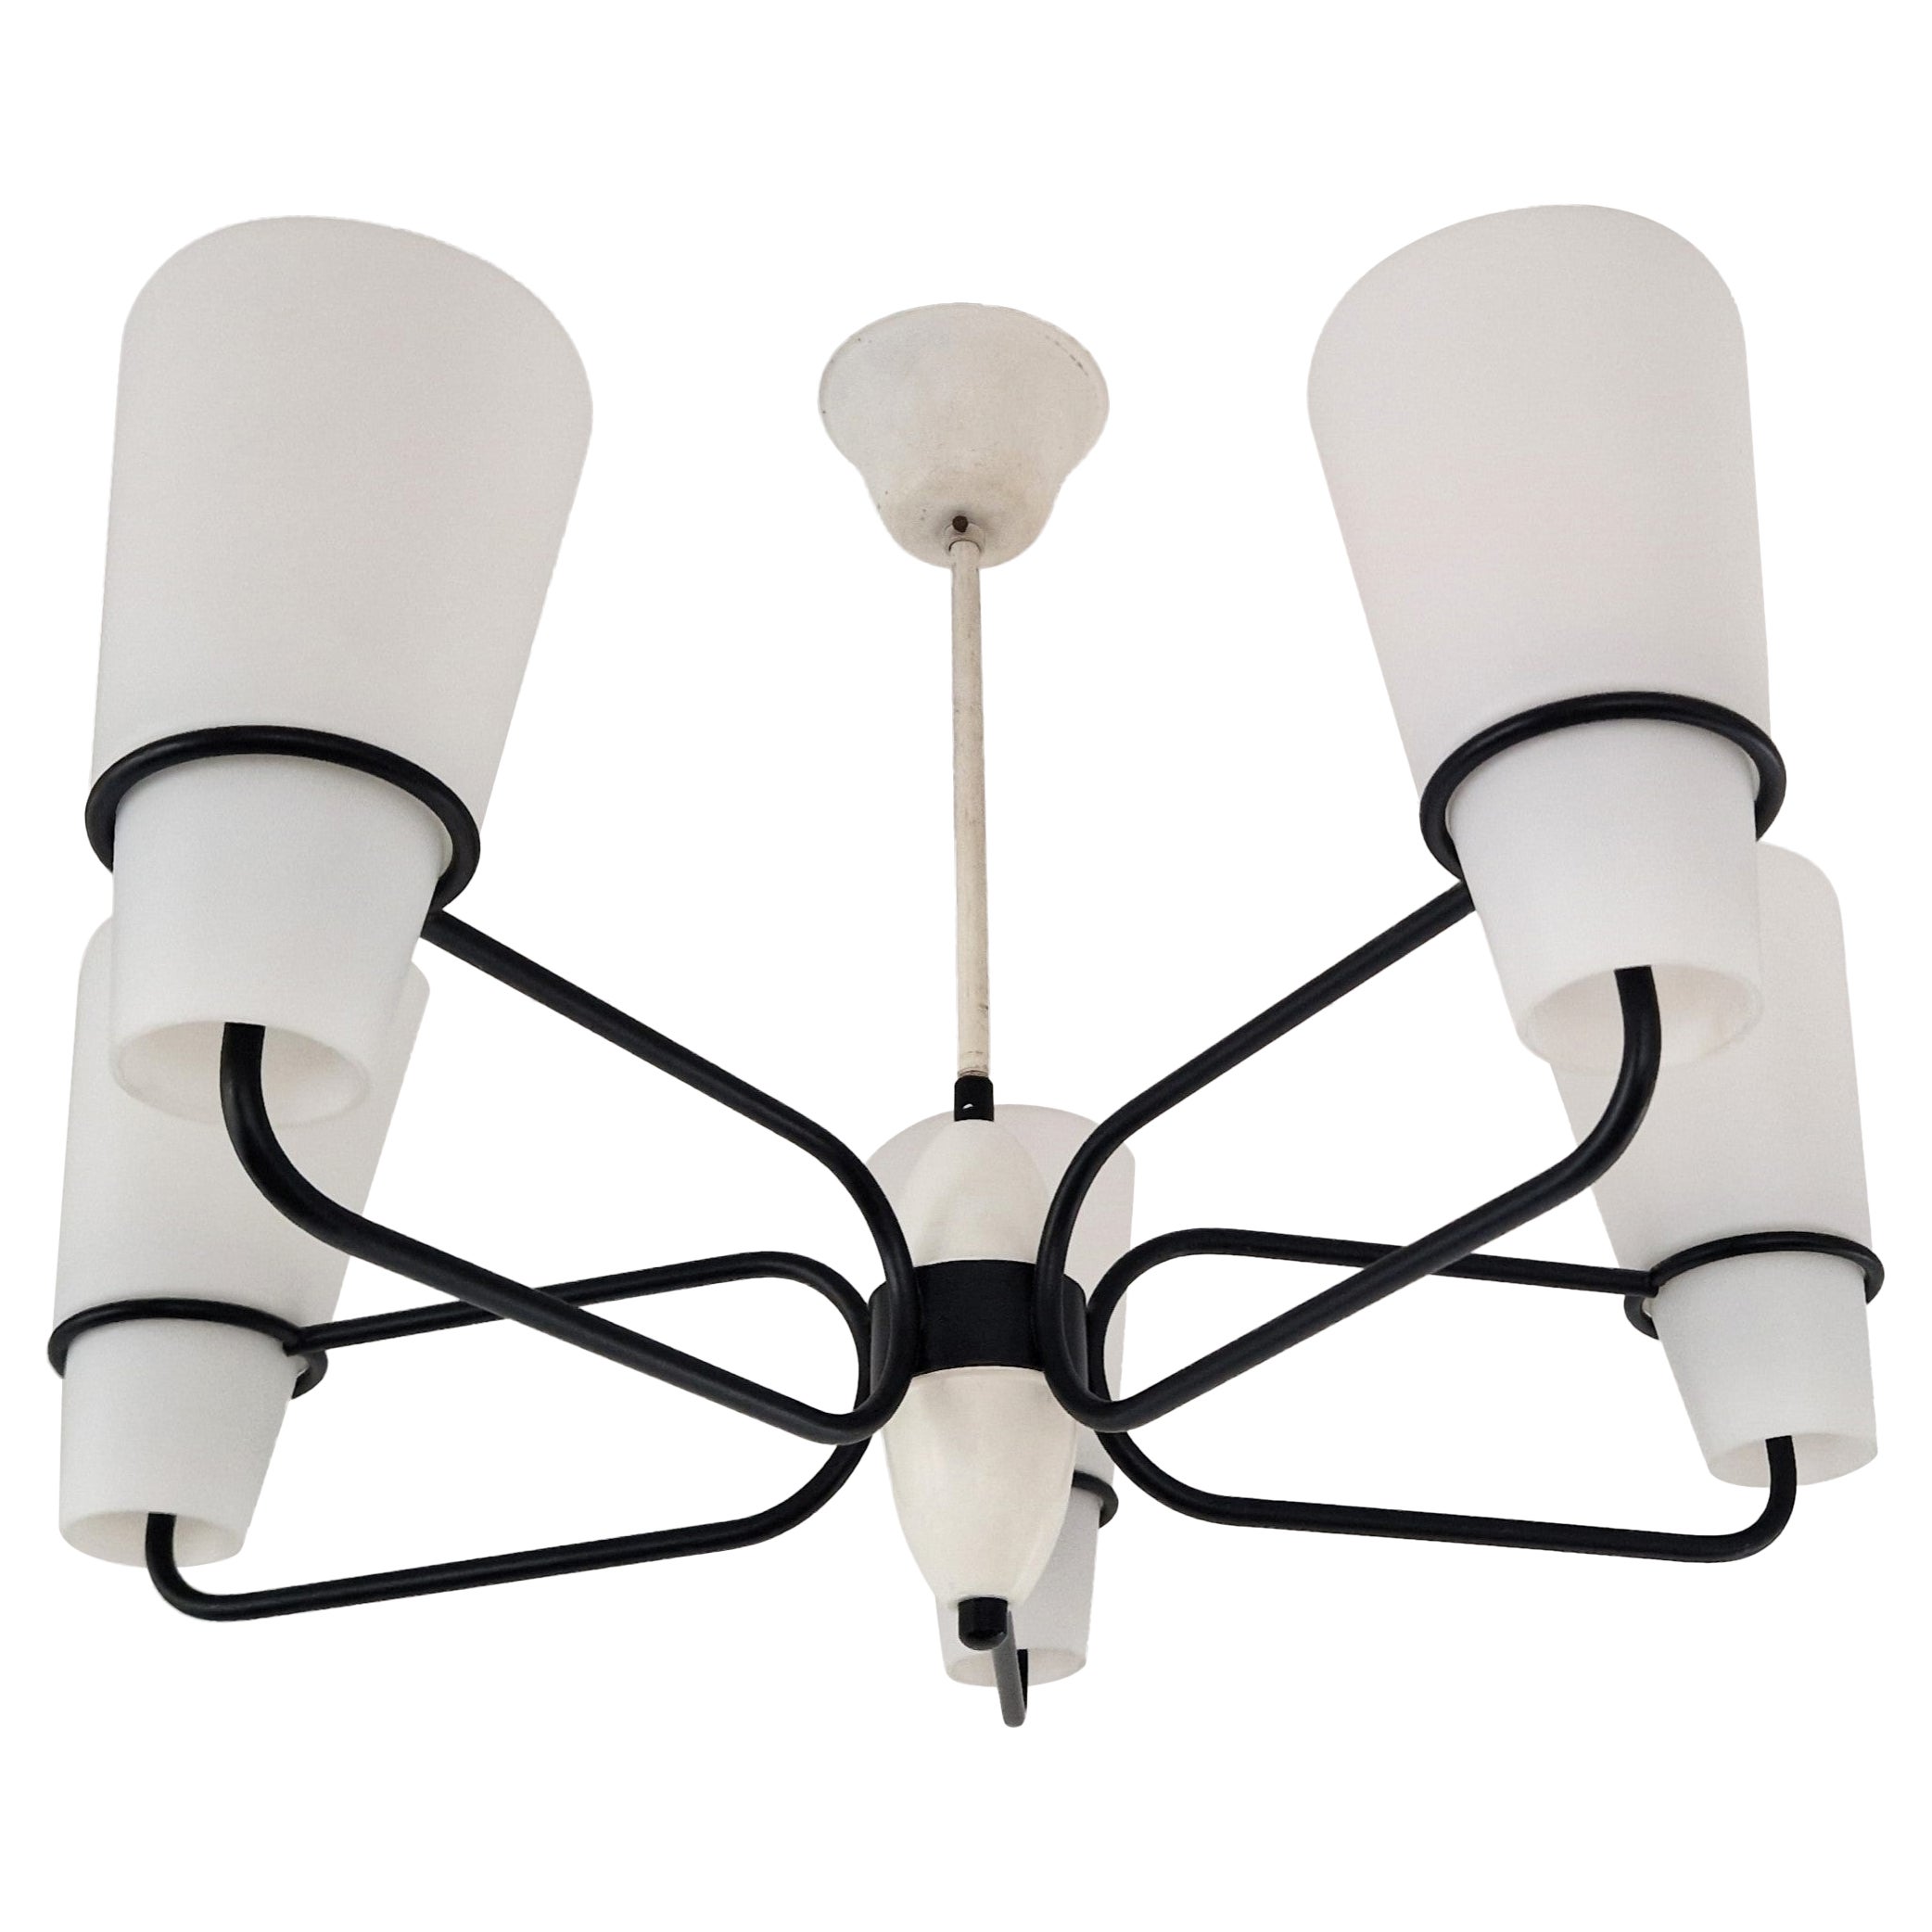 Vintage black and white 5-armed chandelier, 1950's/1960's